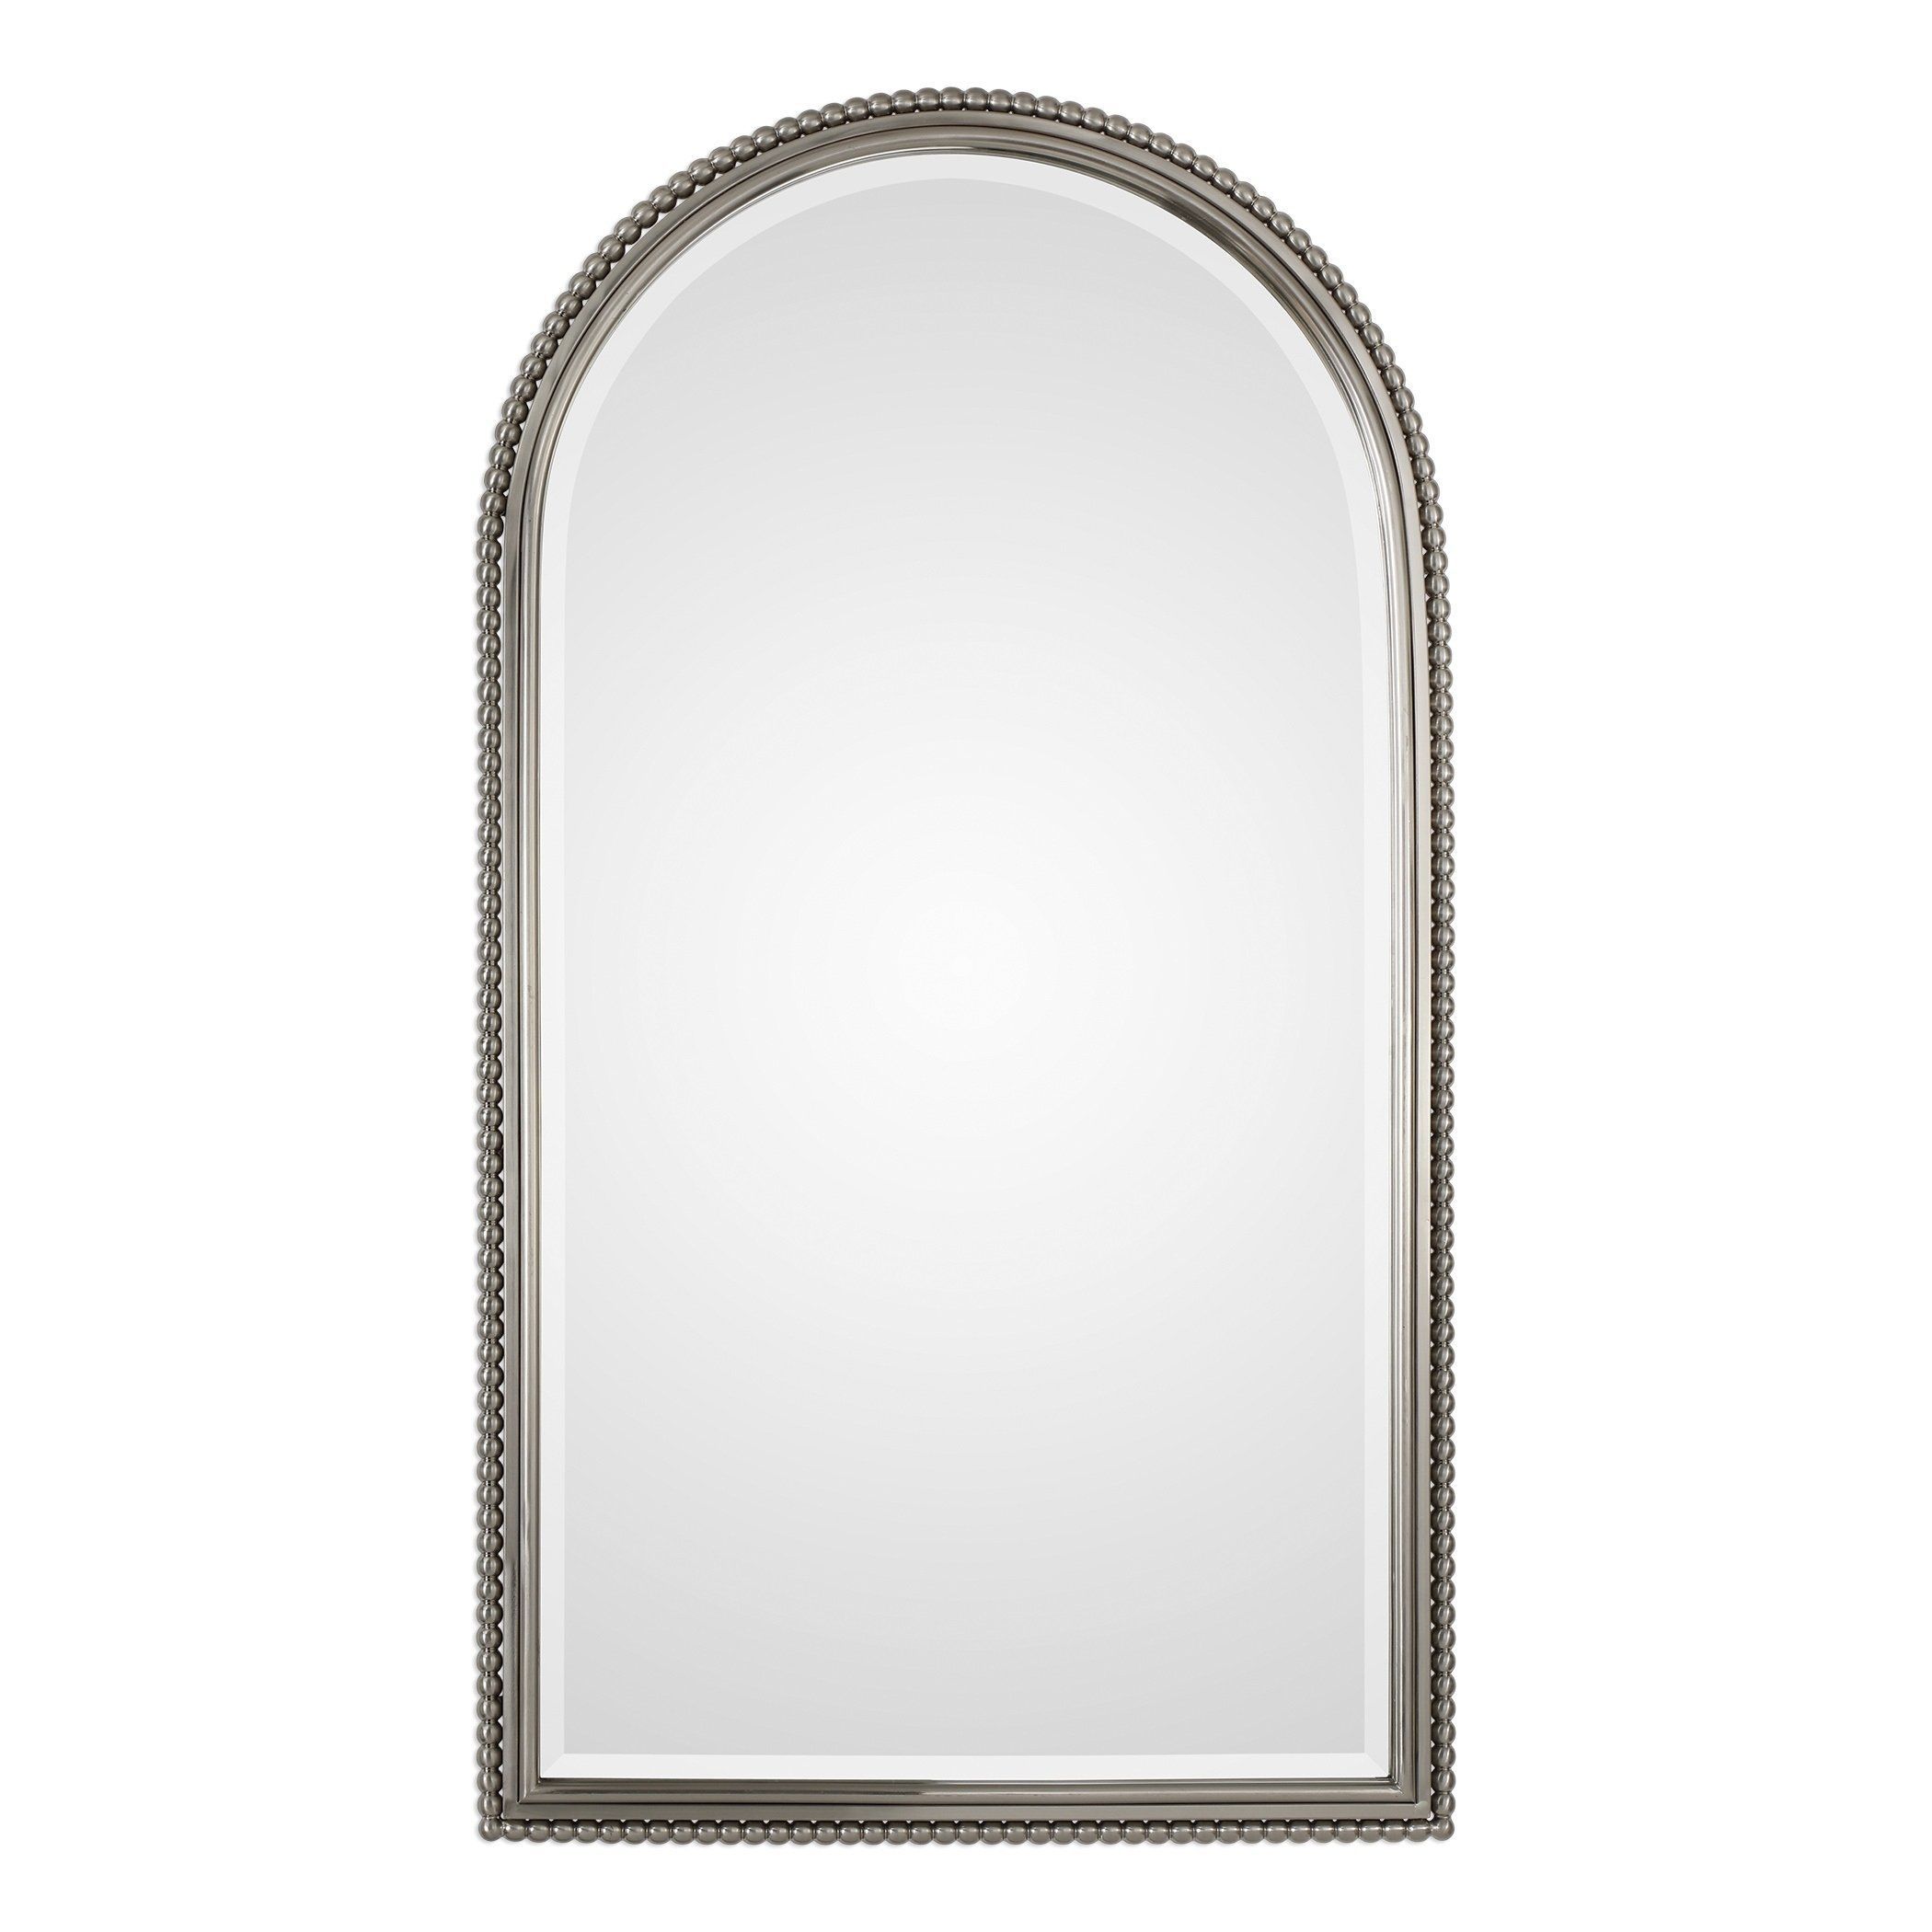 Uttermost Sherise Arch Plated Brushed Nickel Mirror | Arch Mirror Regarding Brushed Nickel Octagon Mirrors (View 8 of 15)